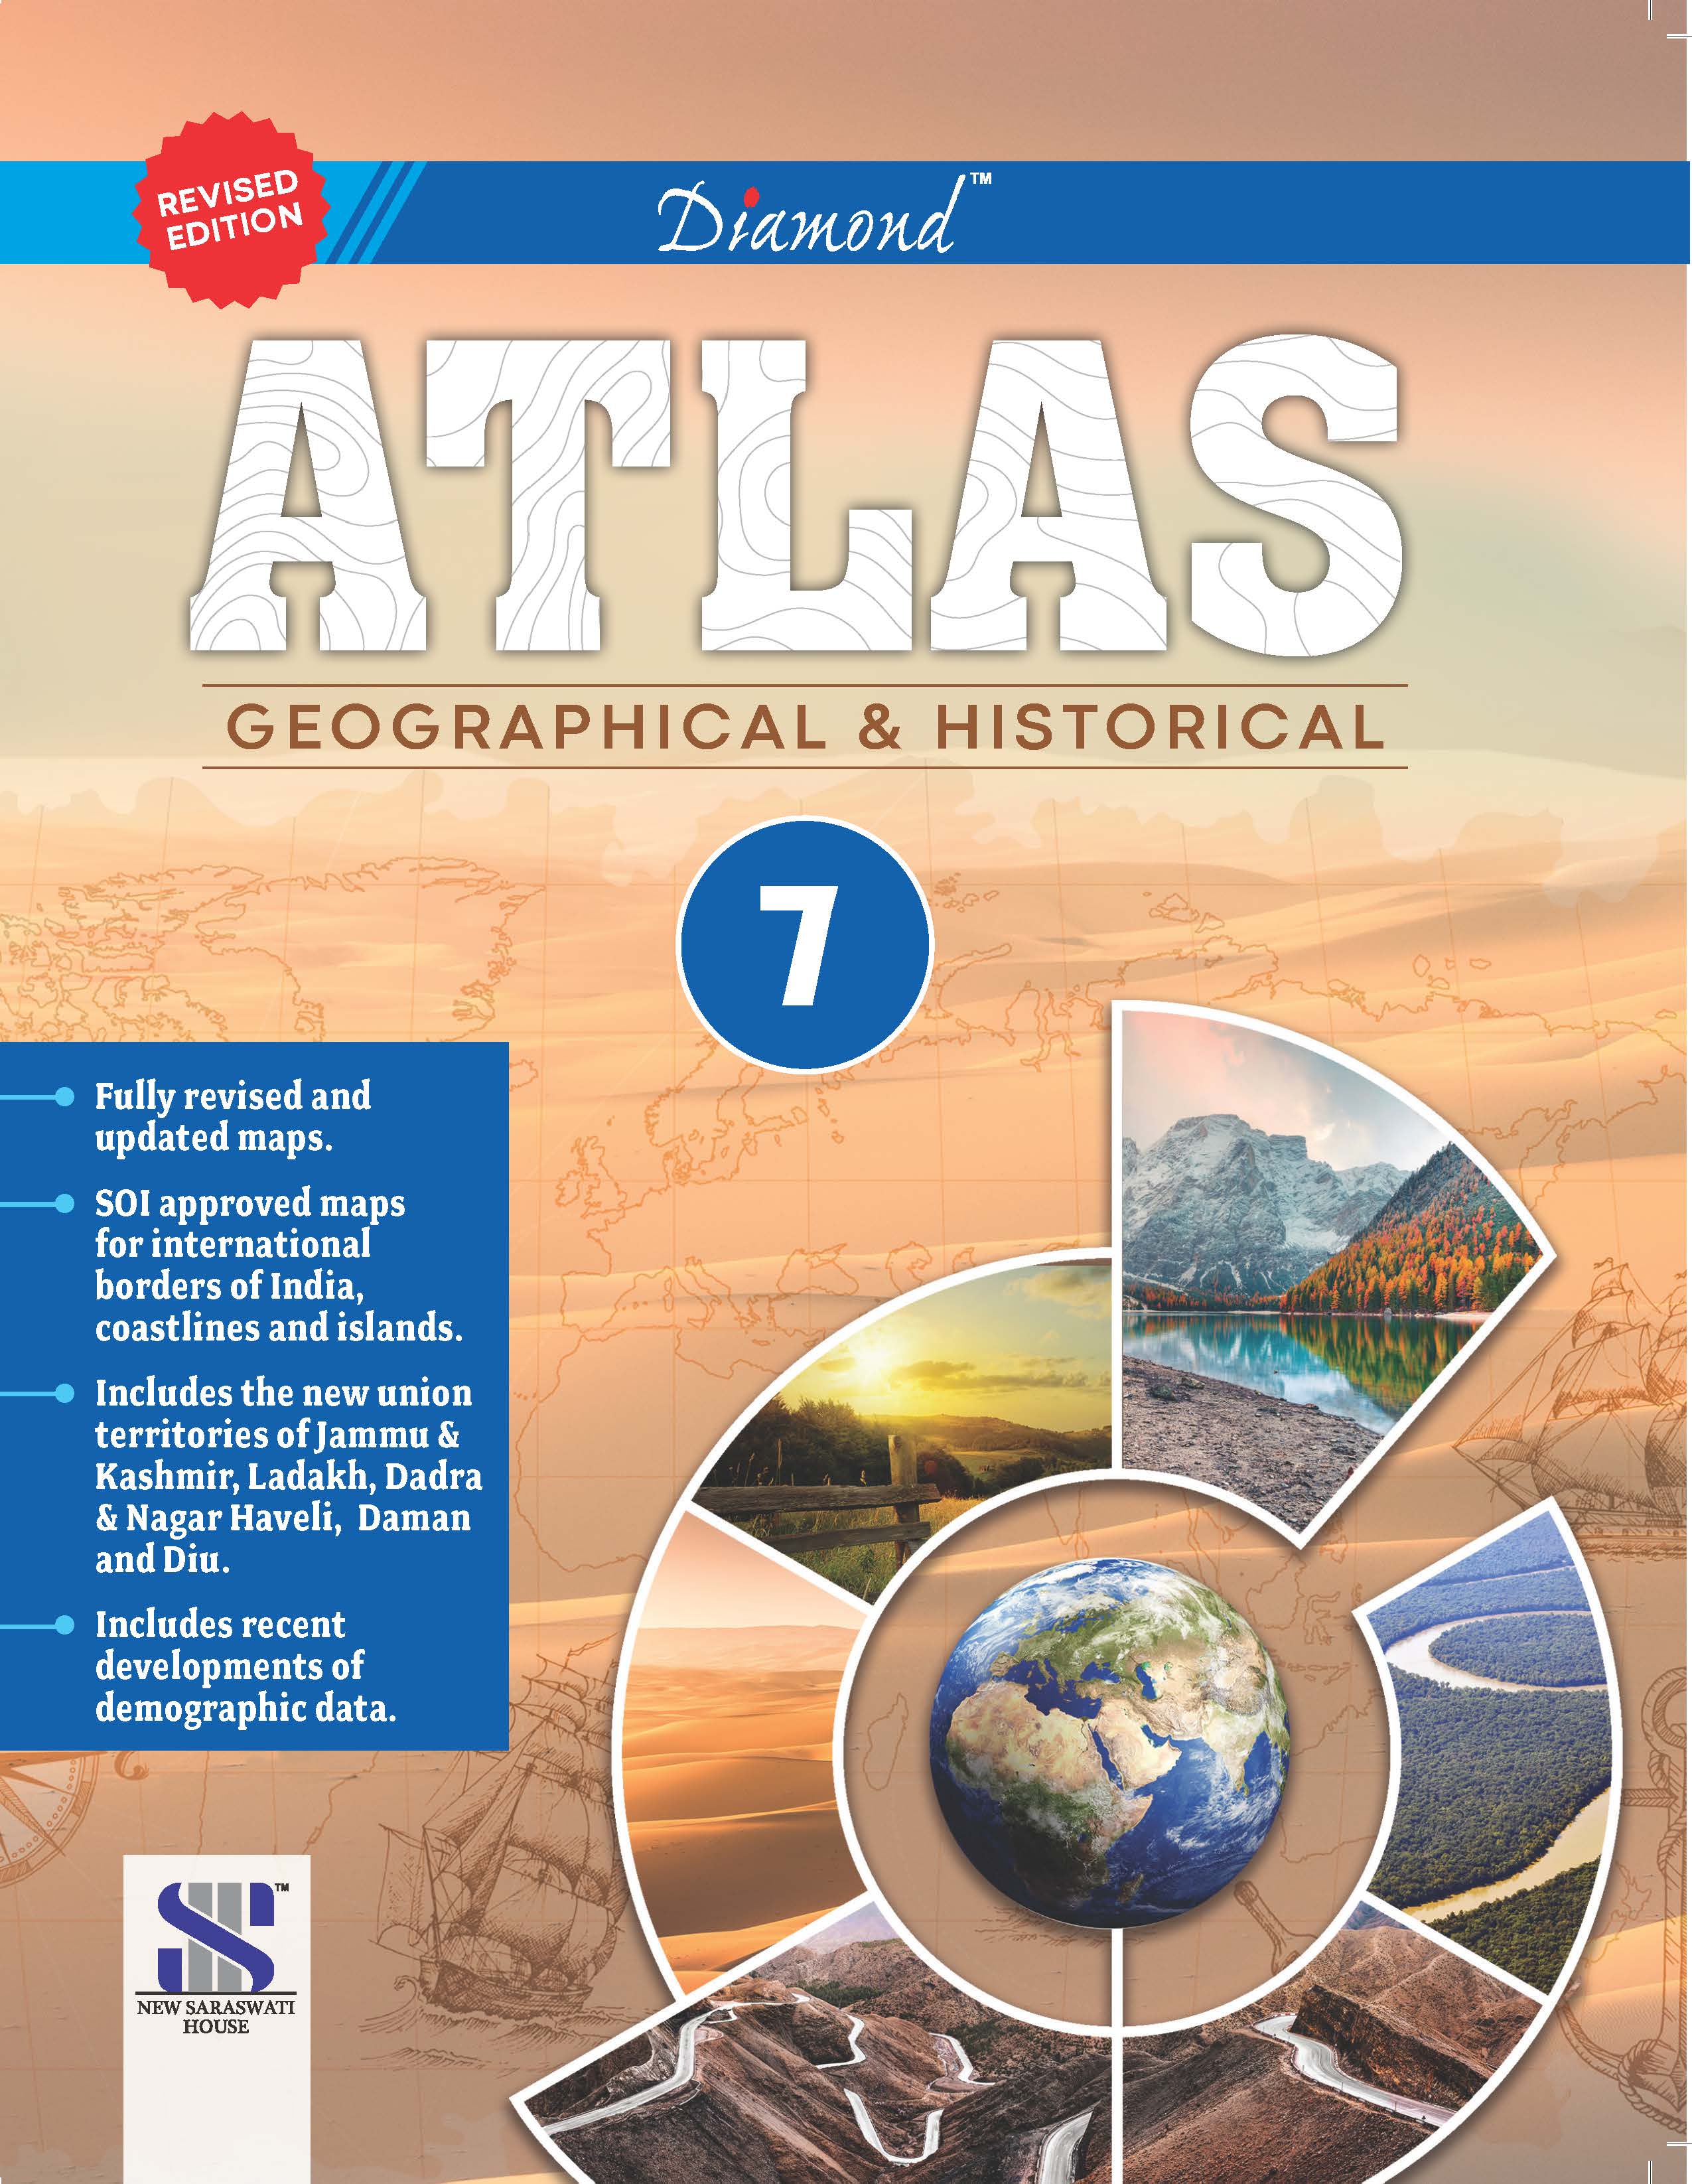 Diamond Geographical and Historical Atlas-7